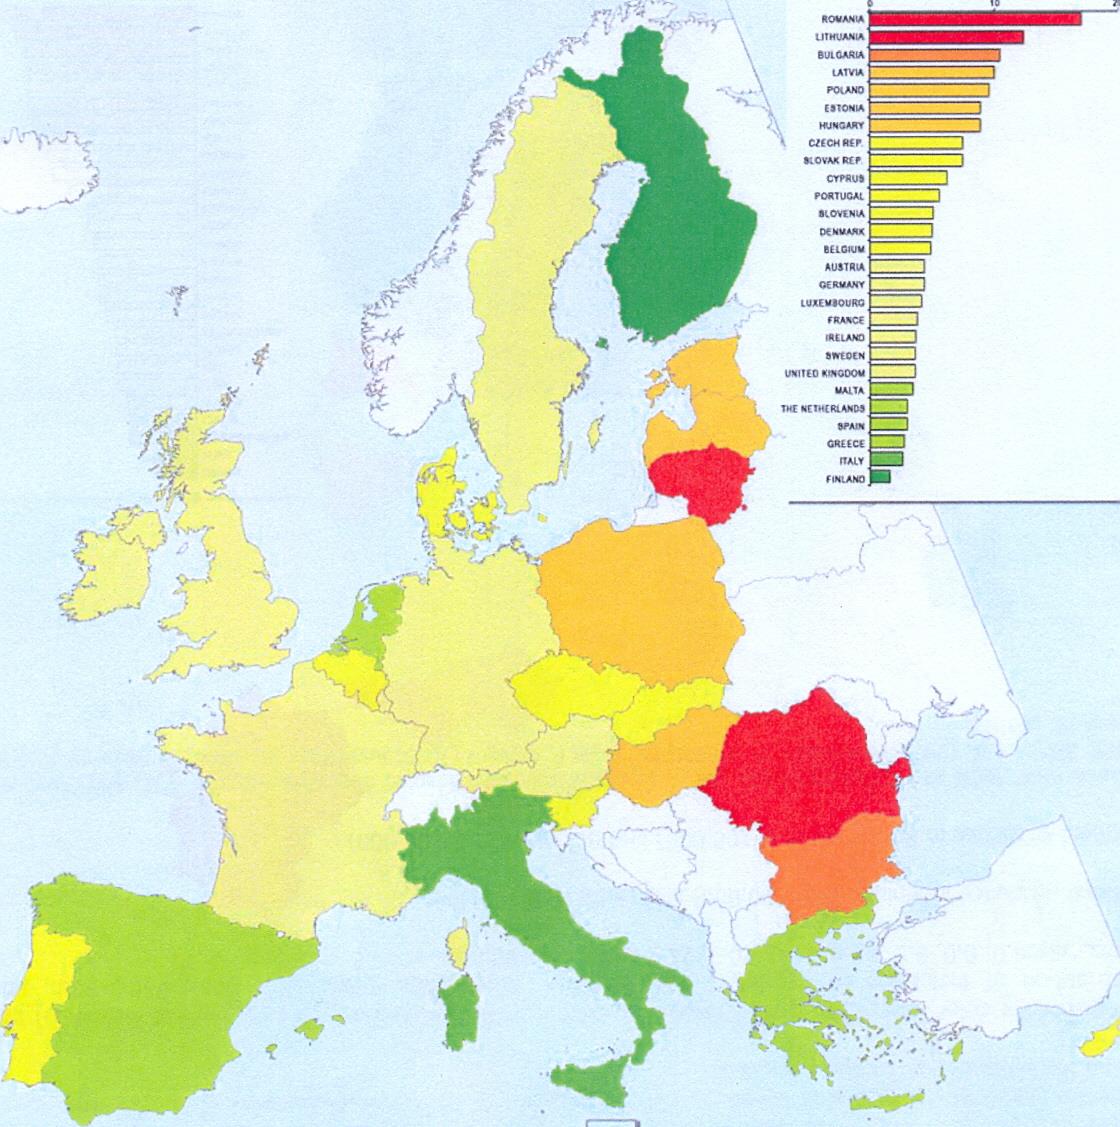 Cervical cancer mortality in the EU Member States